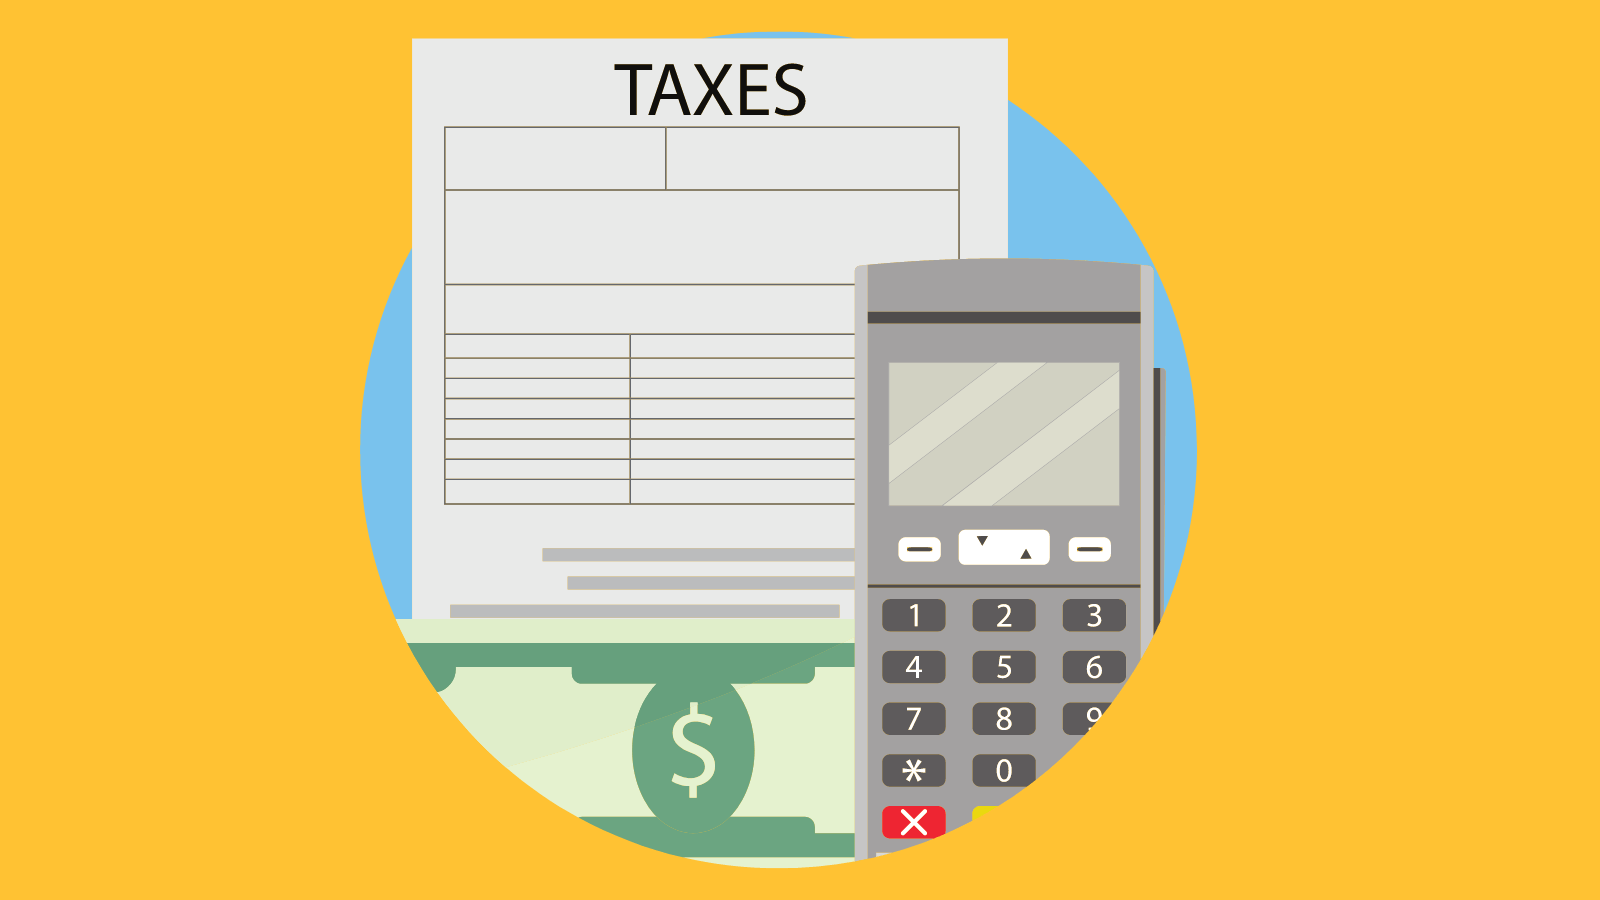 A circular icon with a tax form, a dollar bill, and a calculator inside